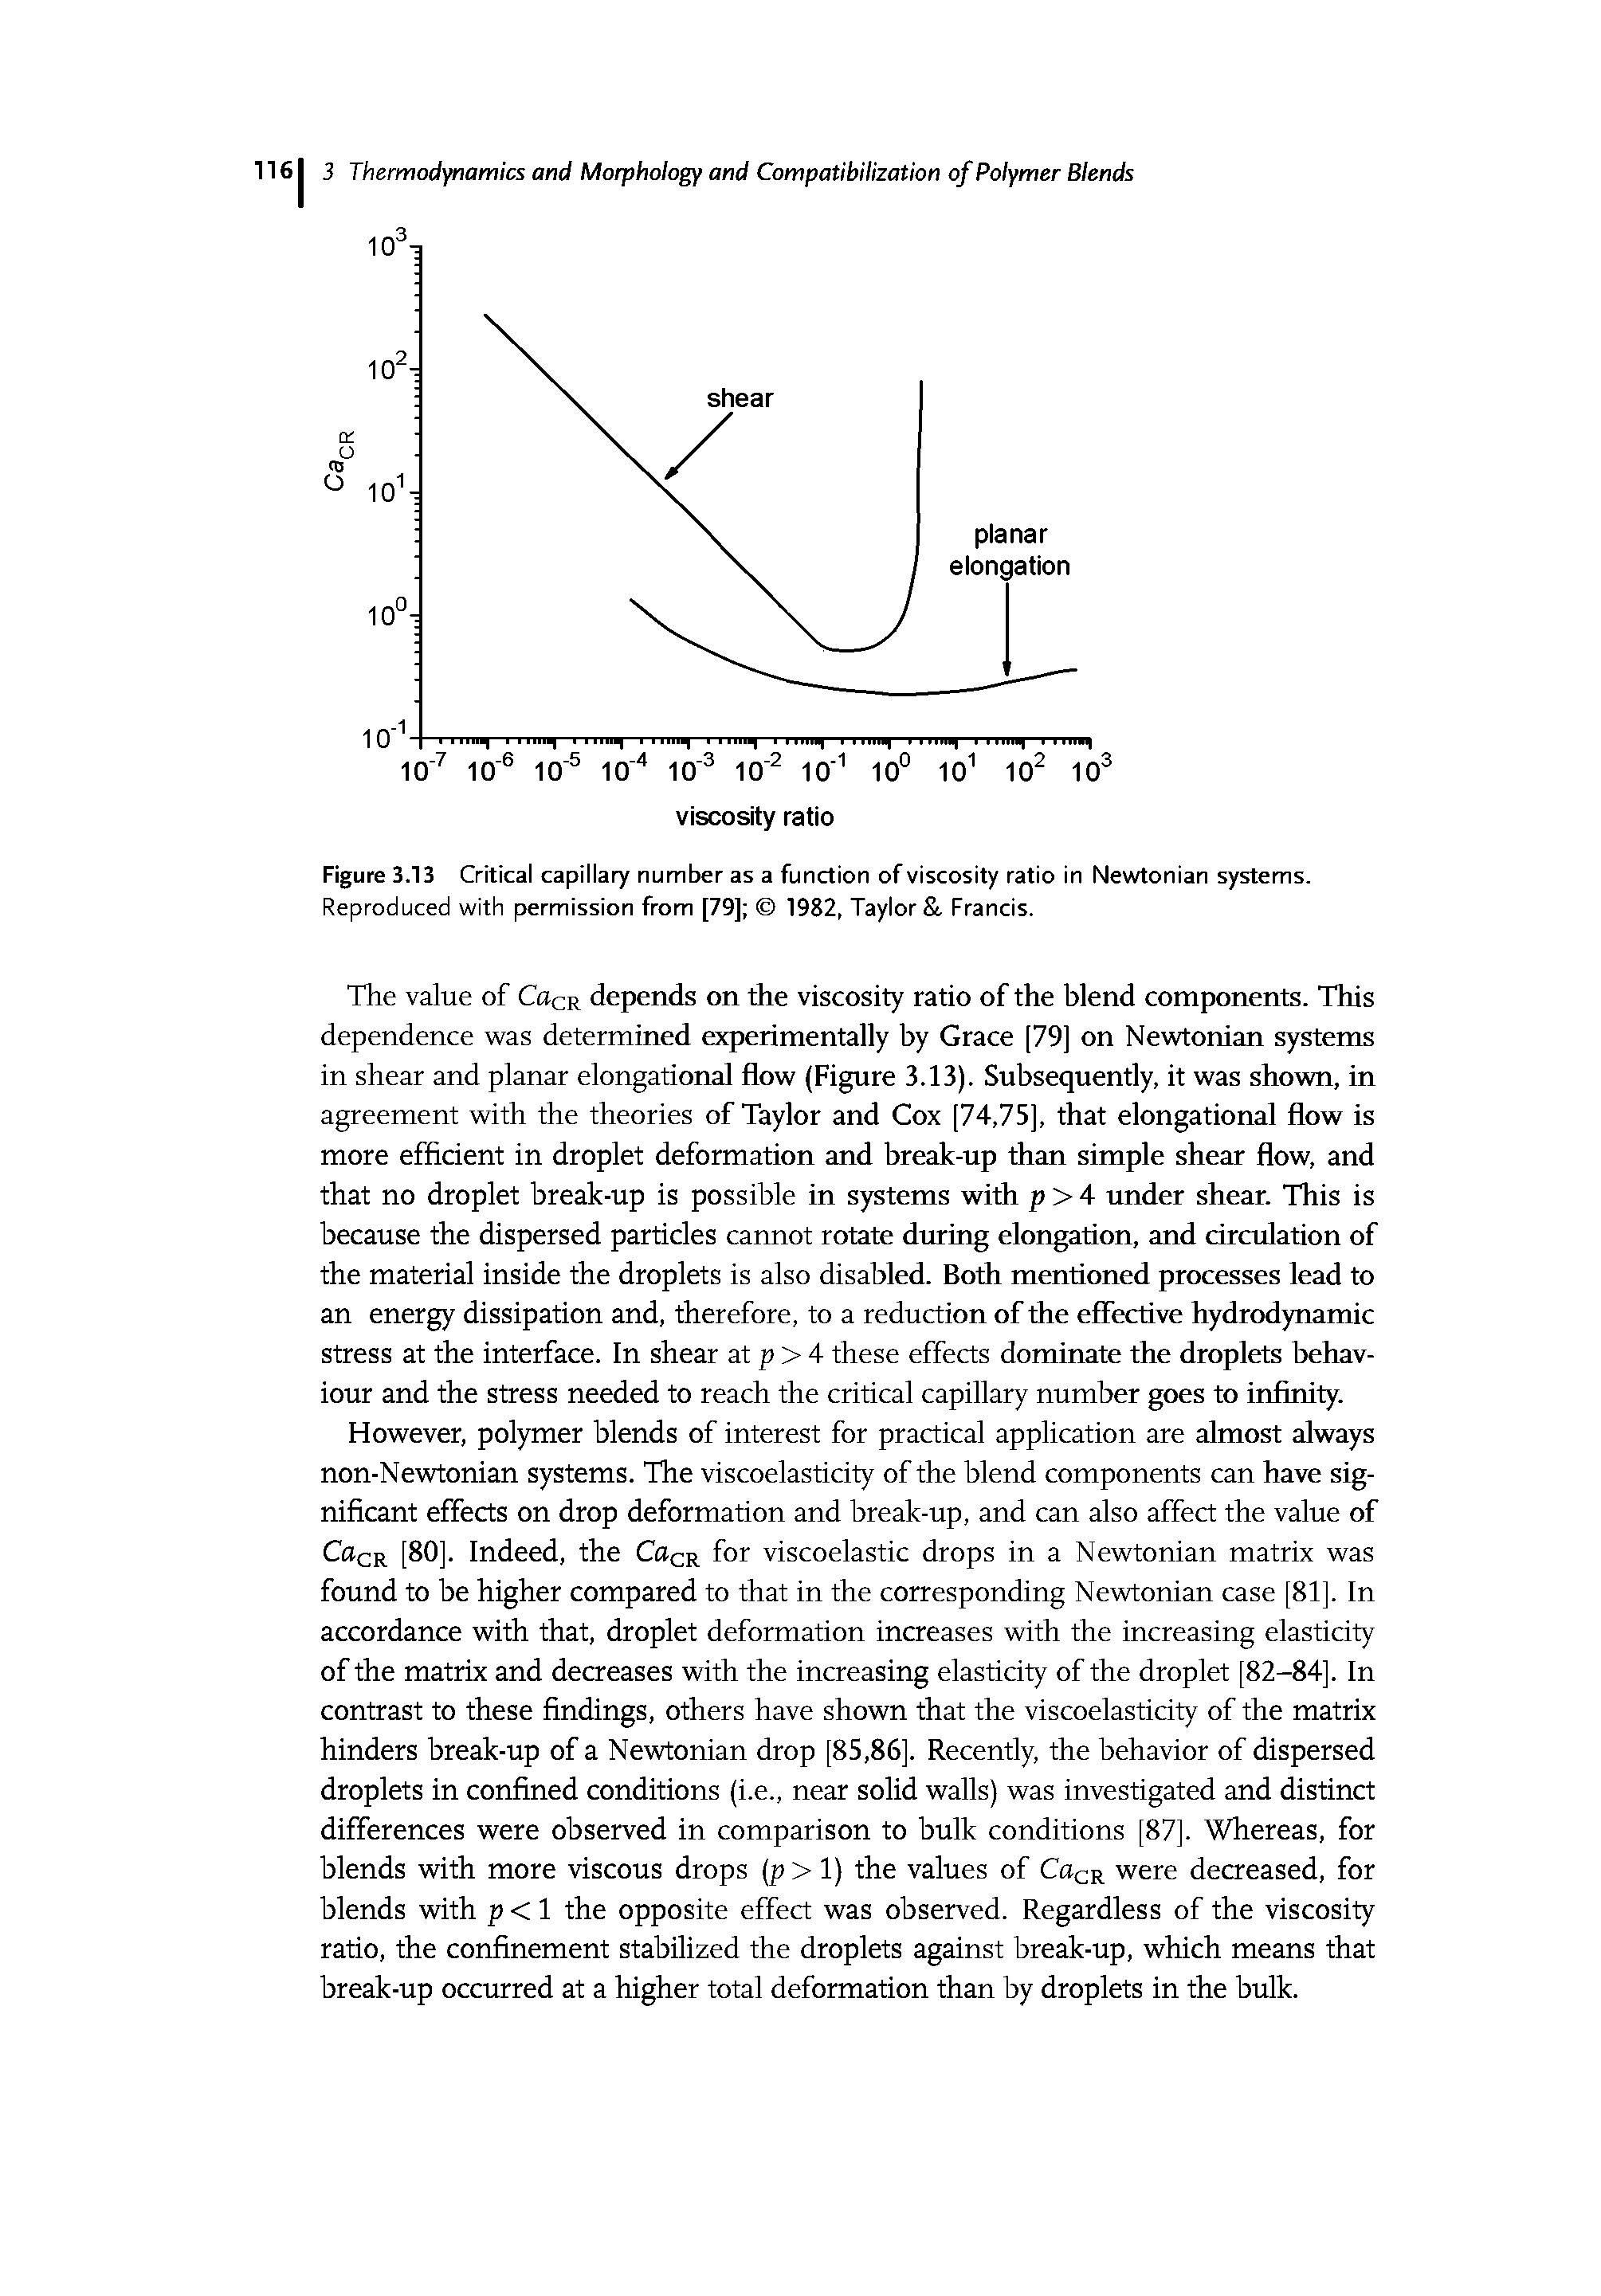 Figure 3.13 Critical capillary number as a function of viscosity ratio in Newtonian systems. Reproduced with permission from [79] 1982, Taylor. Francis.